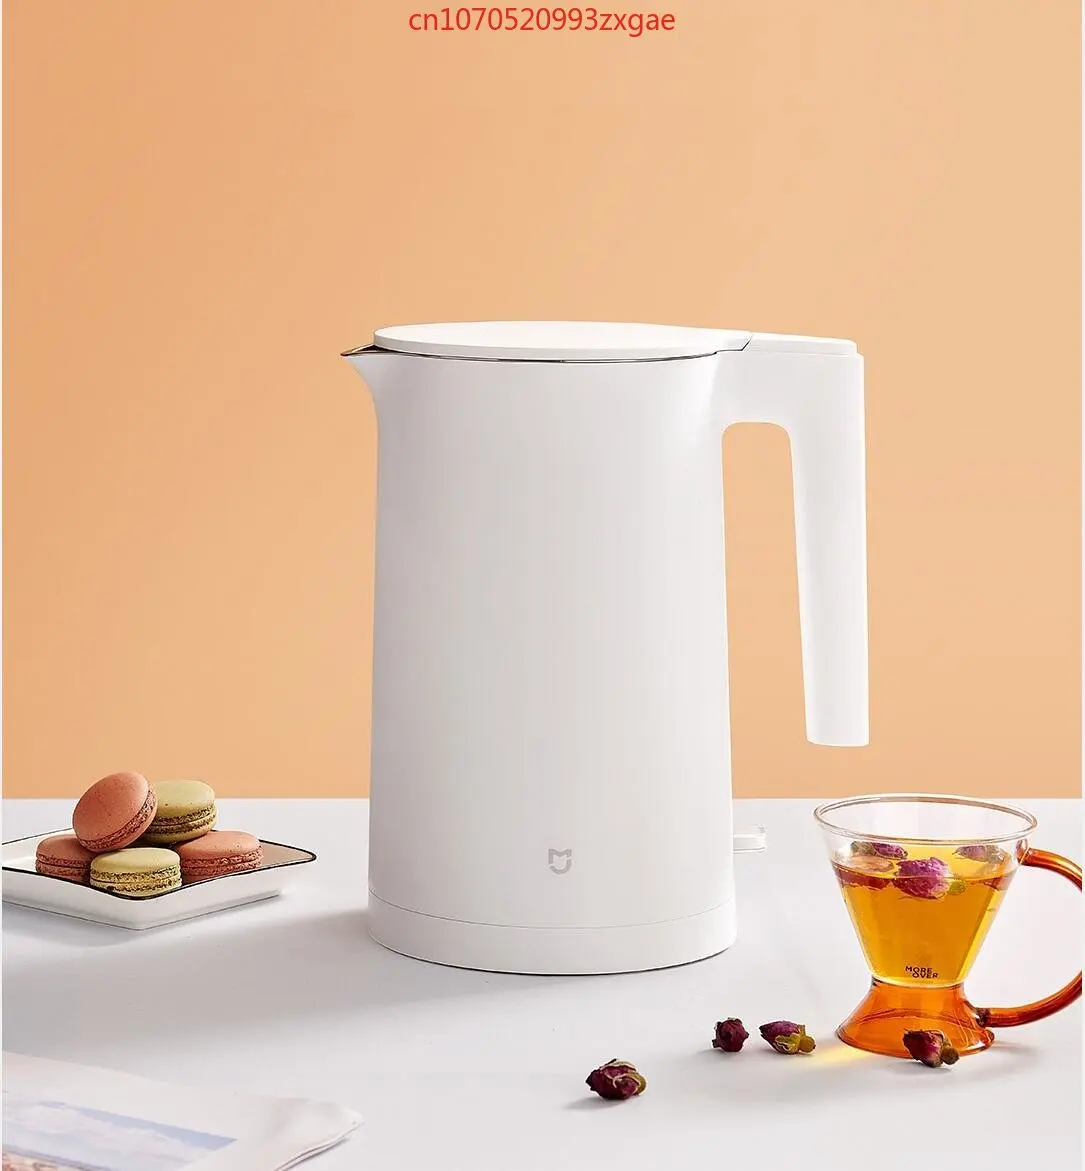 Genuine Xiaomi Mijia Electric kettle 2, 4 boiling protection modes, safe boiling 1.7-litre large-capacity Xiaomi electric kettle enlarge